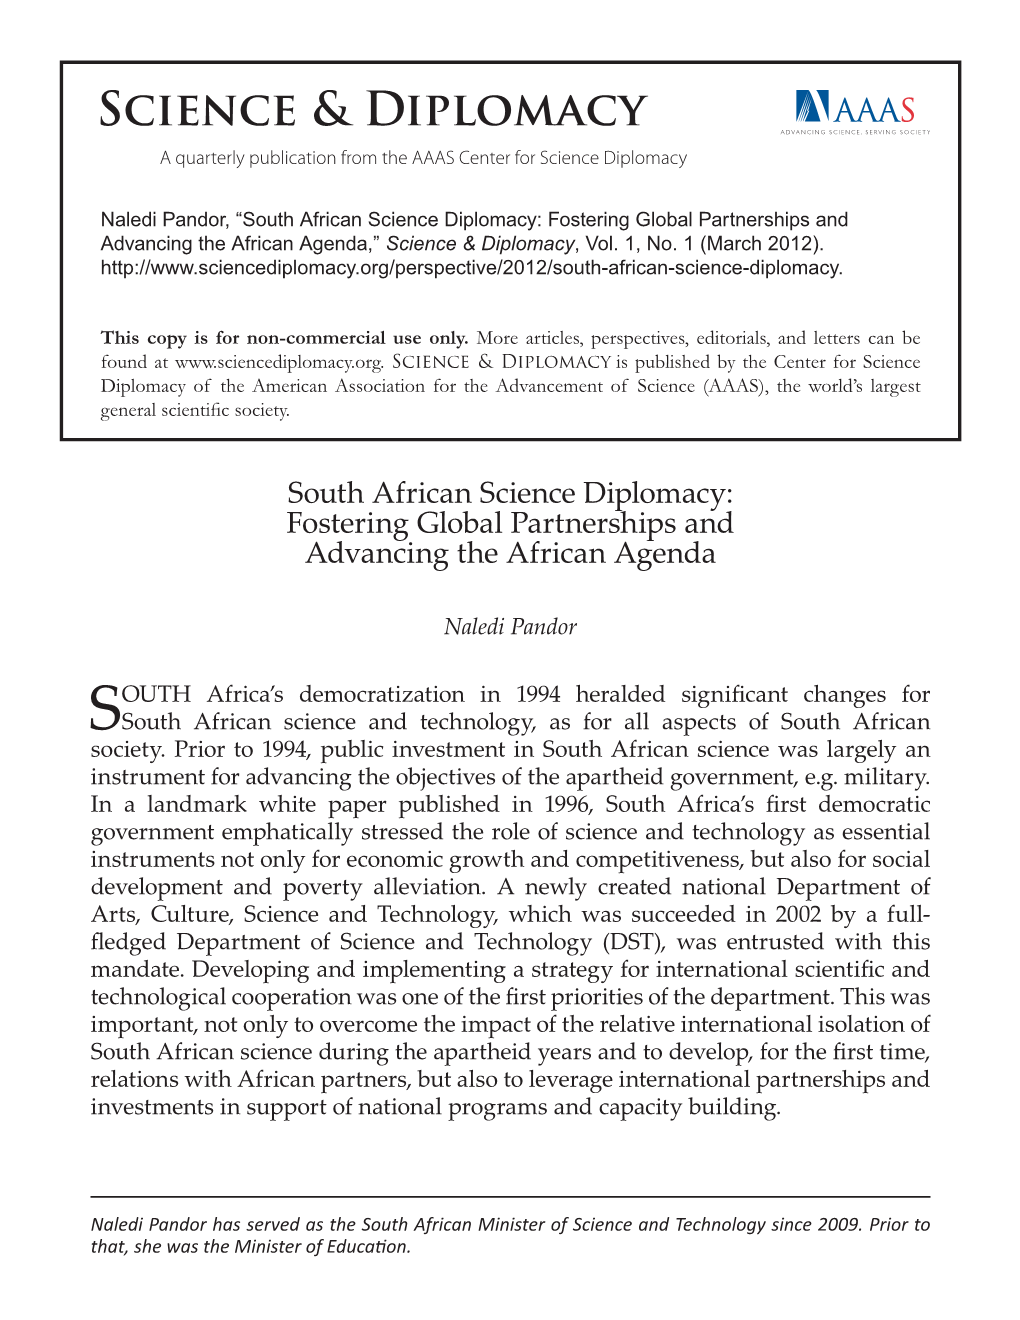 South African Science Diplomacy: Fostering Global Partnerships and Advancing the African Agenda,” Science & Diplomacy, Vol